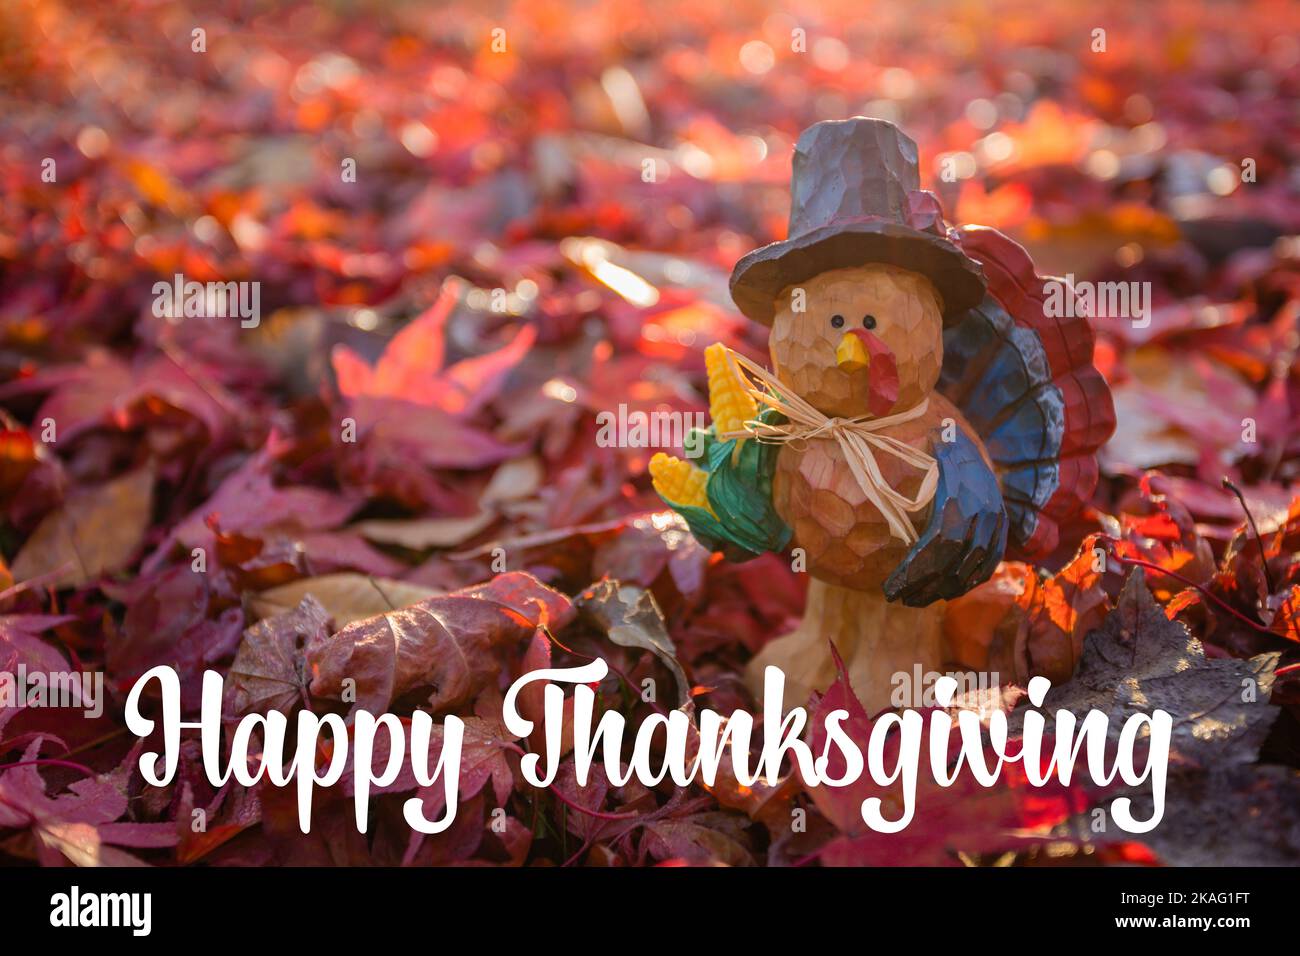 Happy Thanksgiving text vivid red autumn leaves background in morning light and turkey Stock Photo